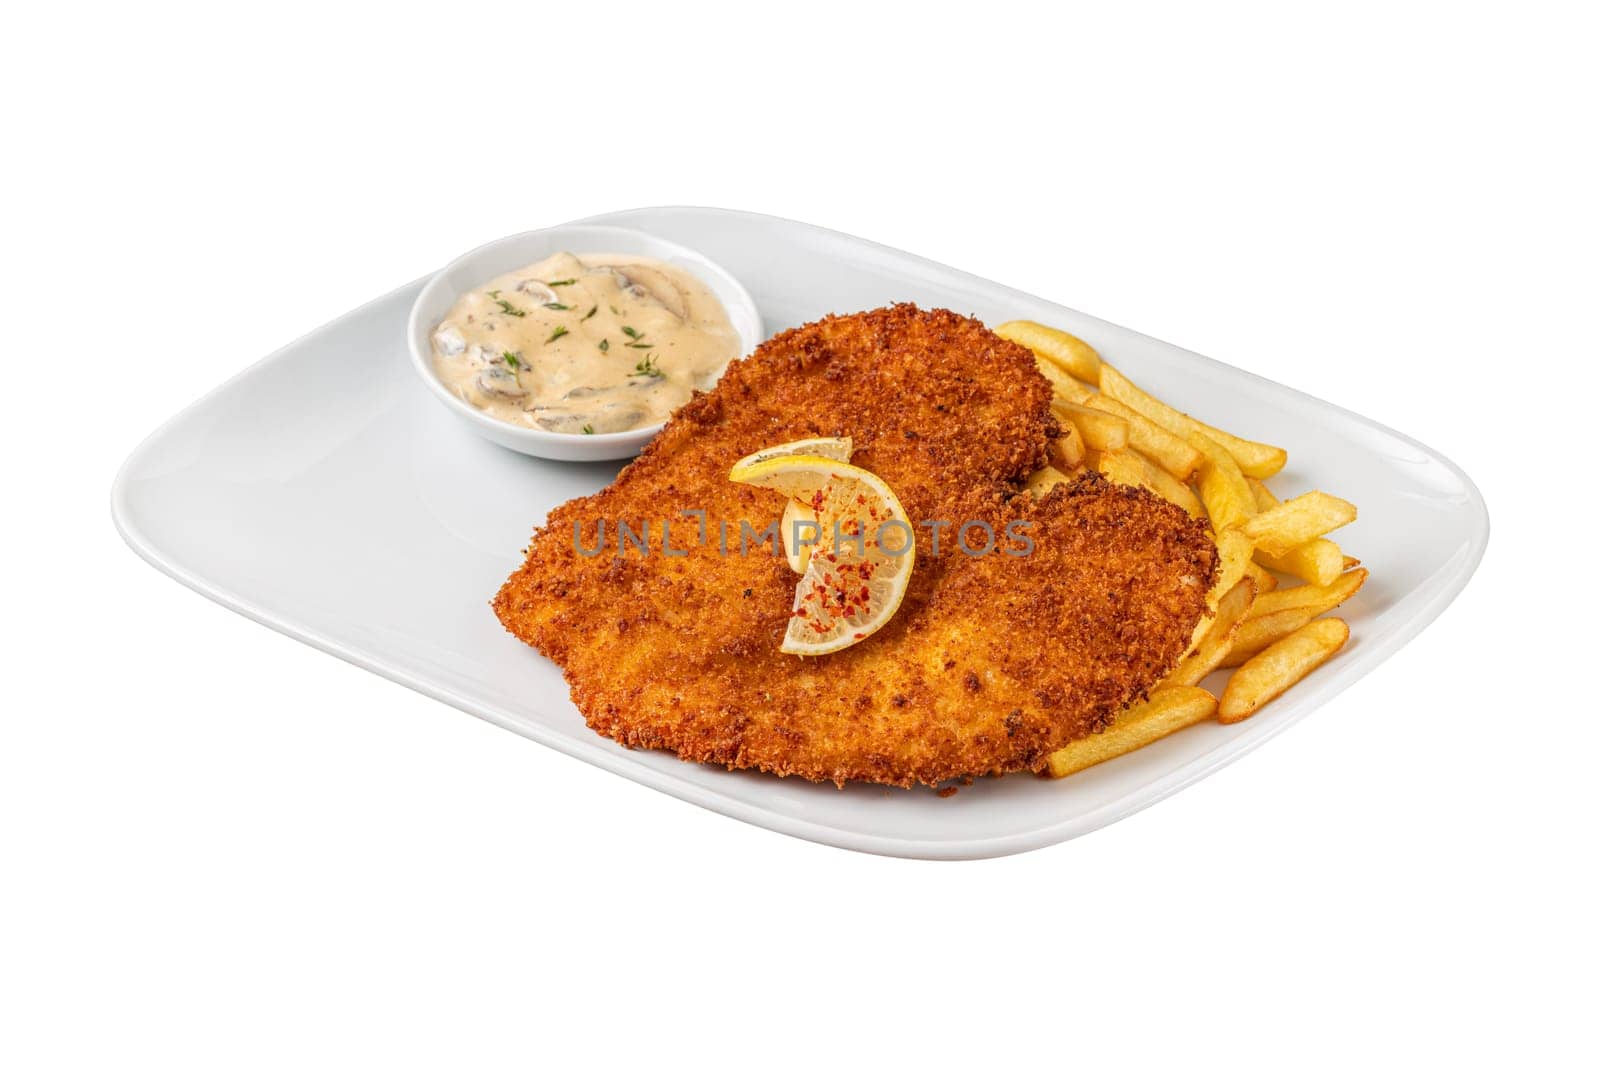 Chicken schnitzel with butter and potato salad on white porcelain plate by Sonat